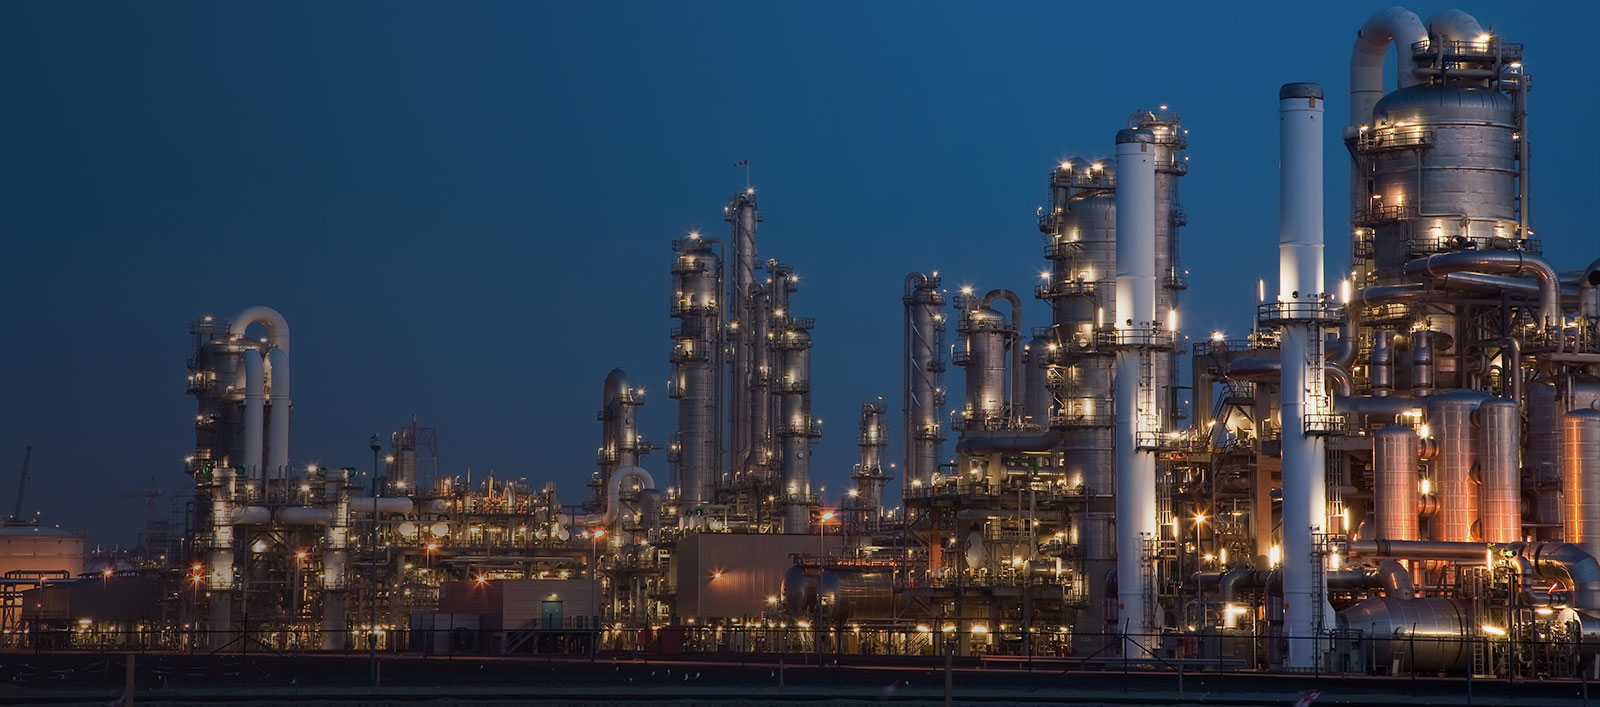 Image of refinery for chemicals